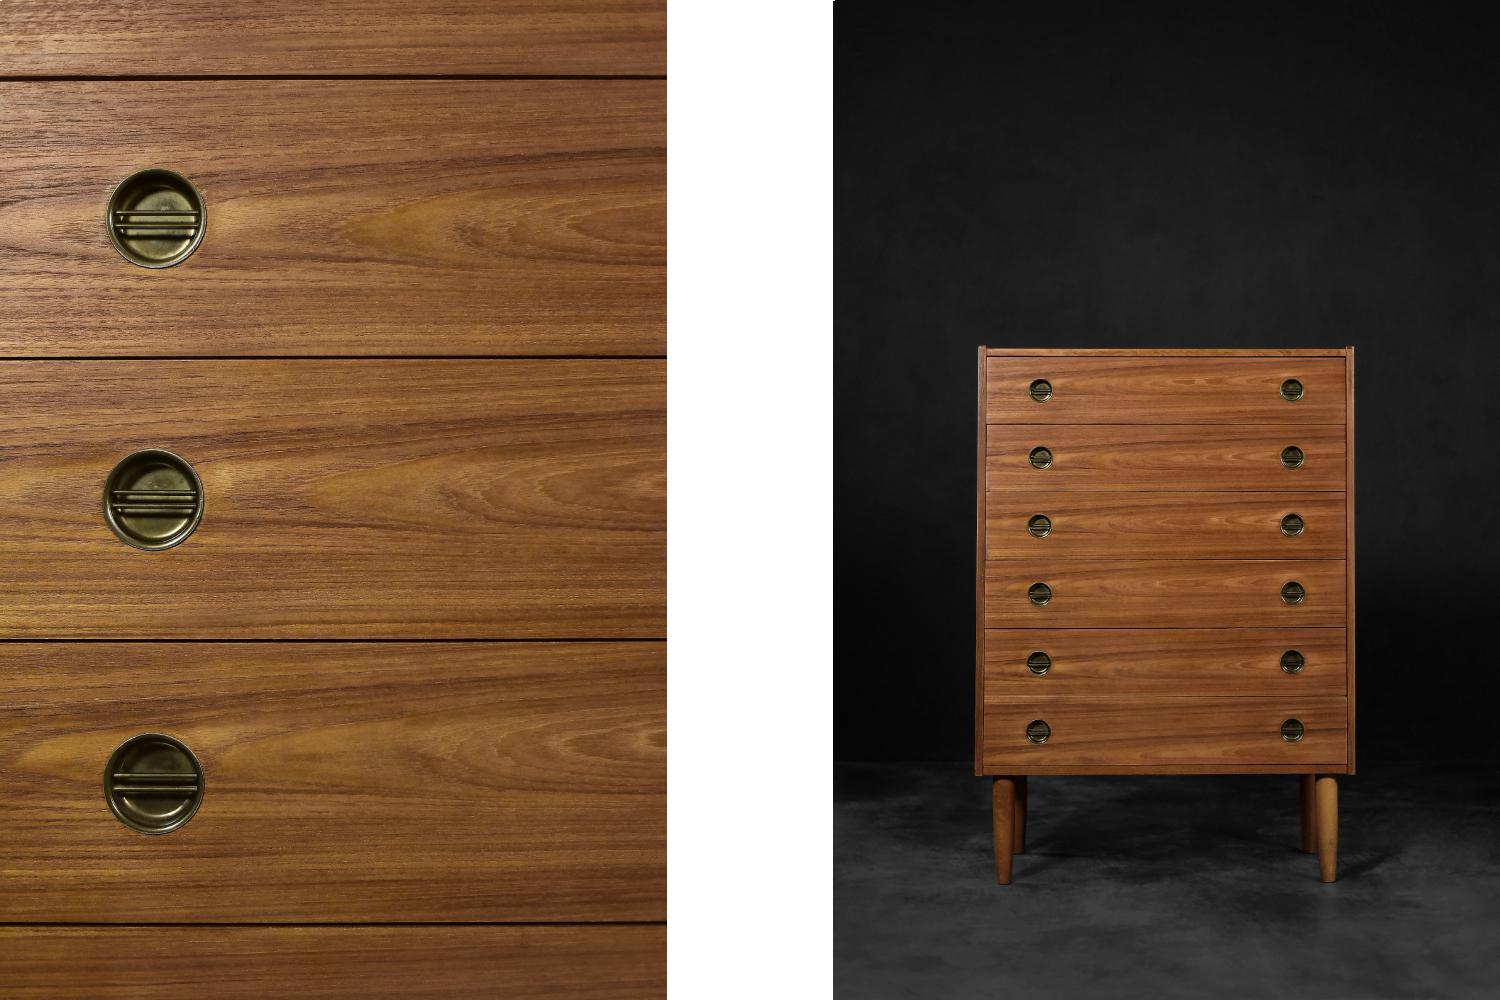 This high chest of drawers was made in Denmark during the 1960s. This type of chest of drawers is often referred to as Highboy. It is finished in high-quality teak wood in a warm shade of brown with visible, interesting graining. It has six drawers.